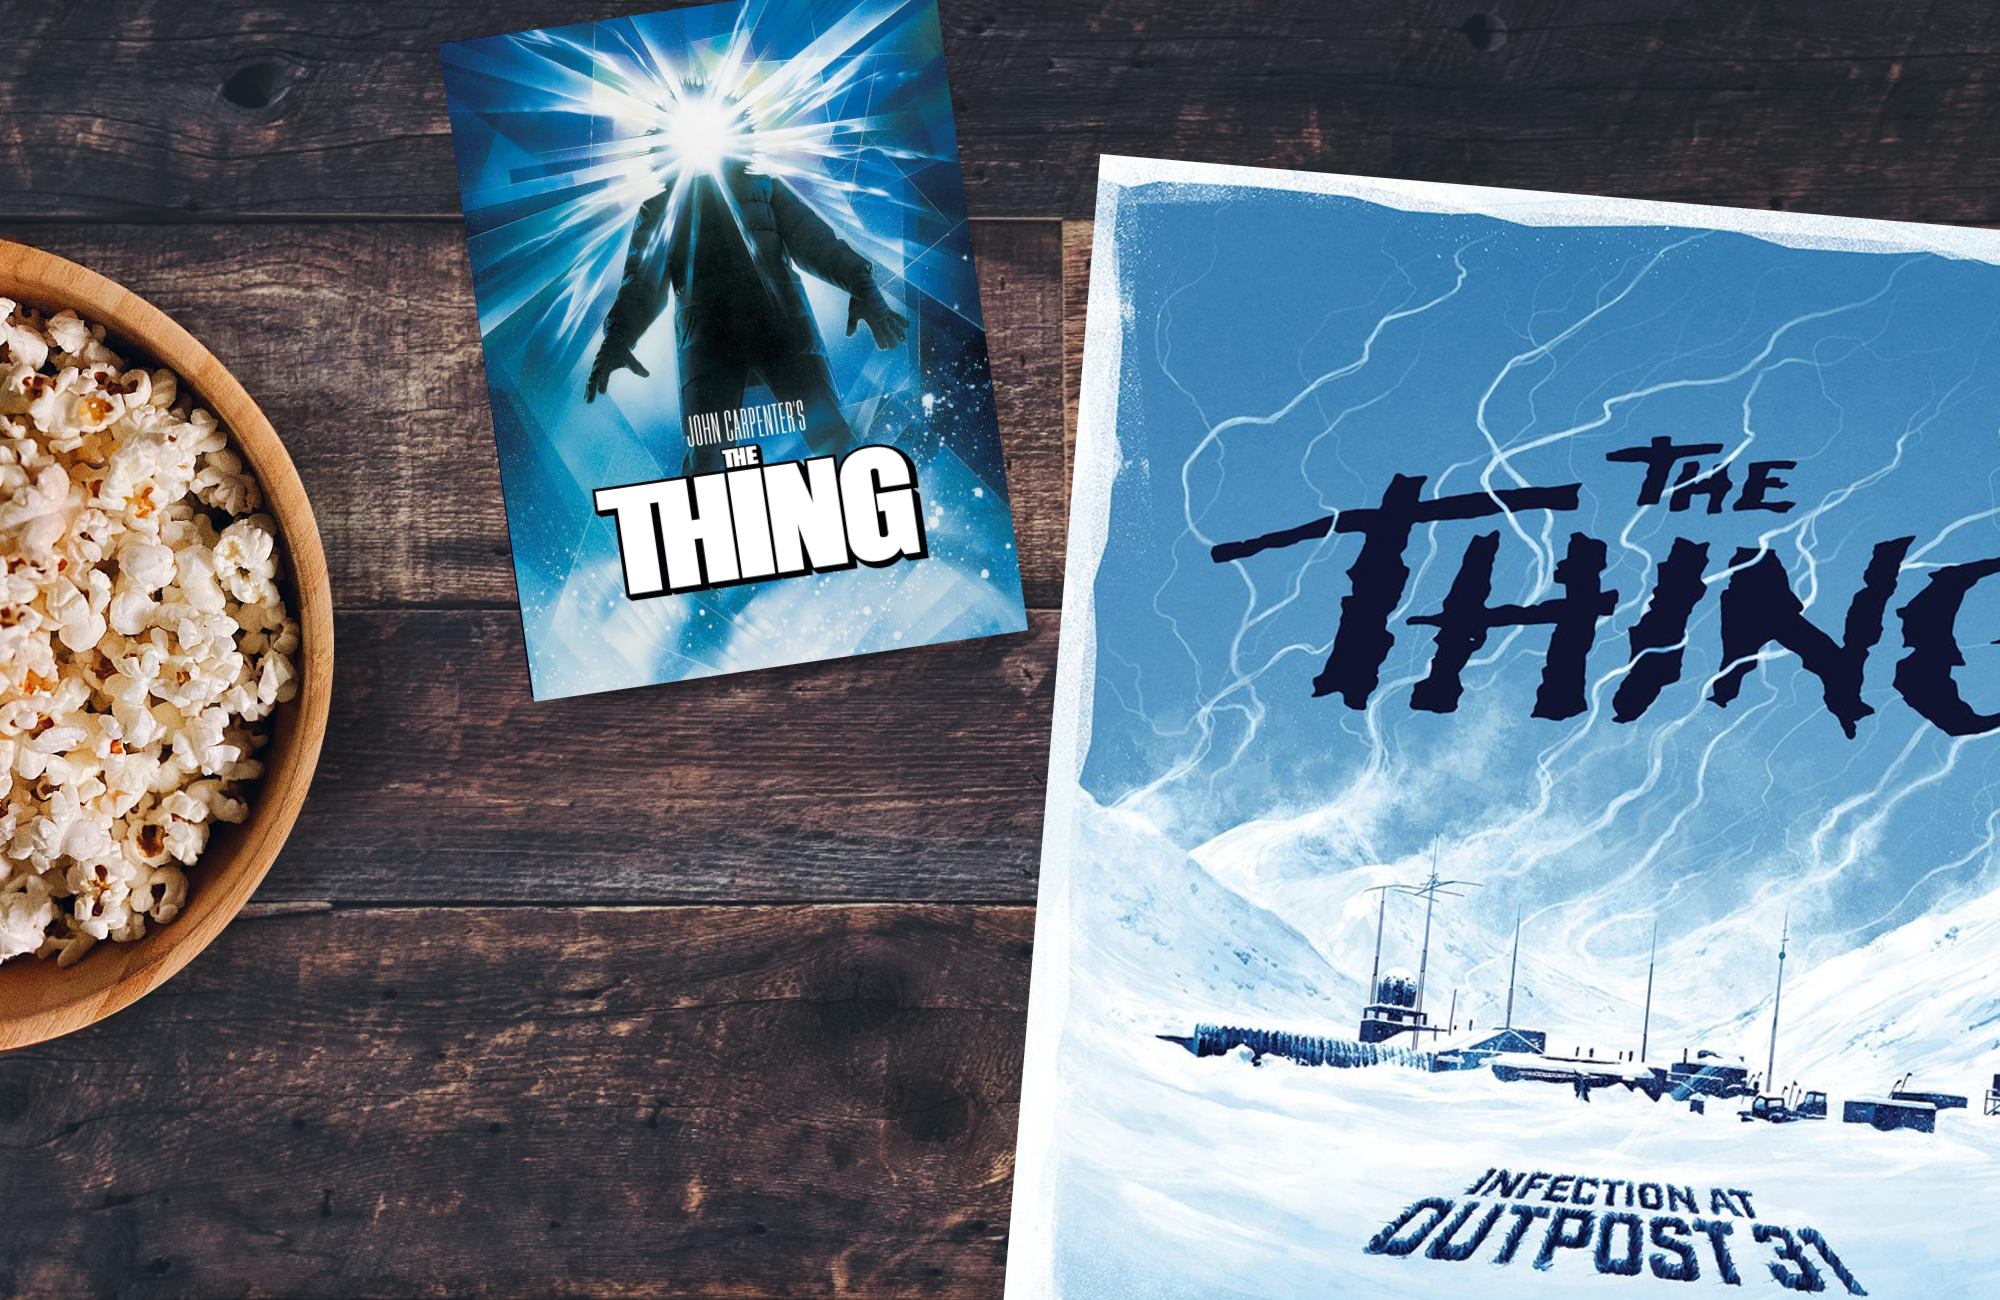 The Thing movie and game